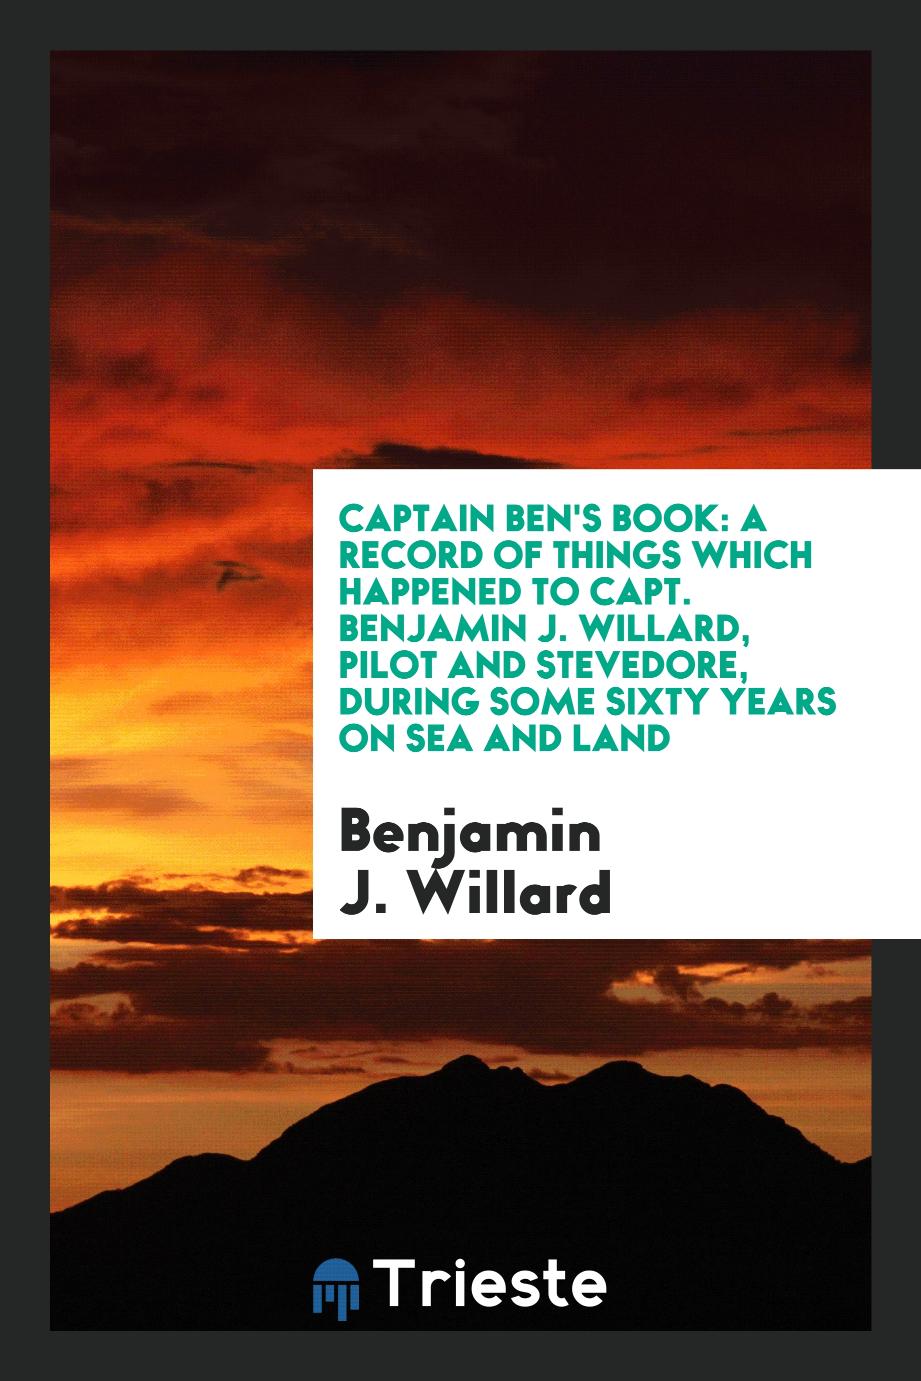 Captain Ben's book: a record of things which happened to Capt. Benjamin J. Willard, pilot and stevedore, during some sixty years on sea and land